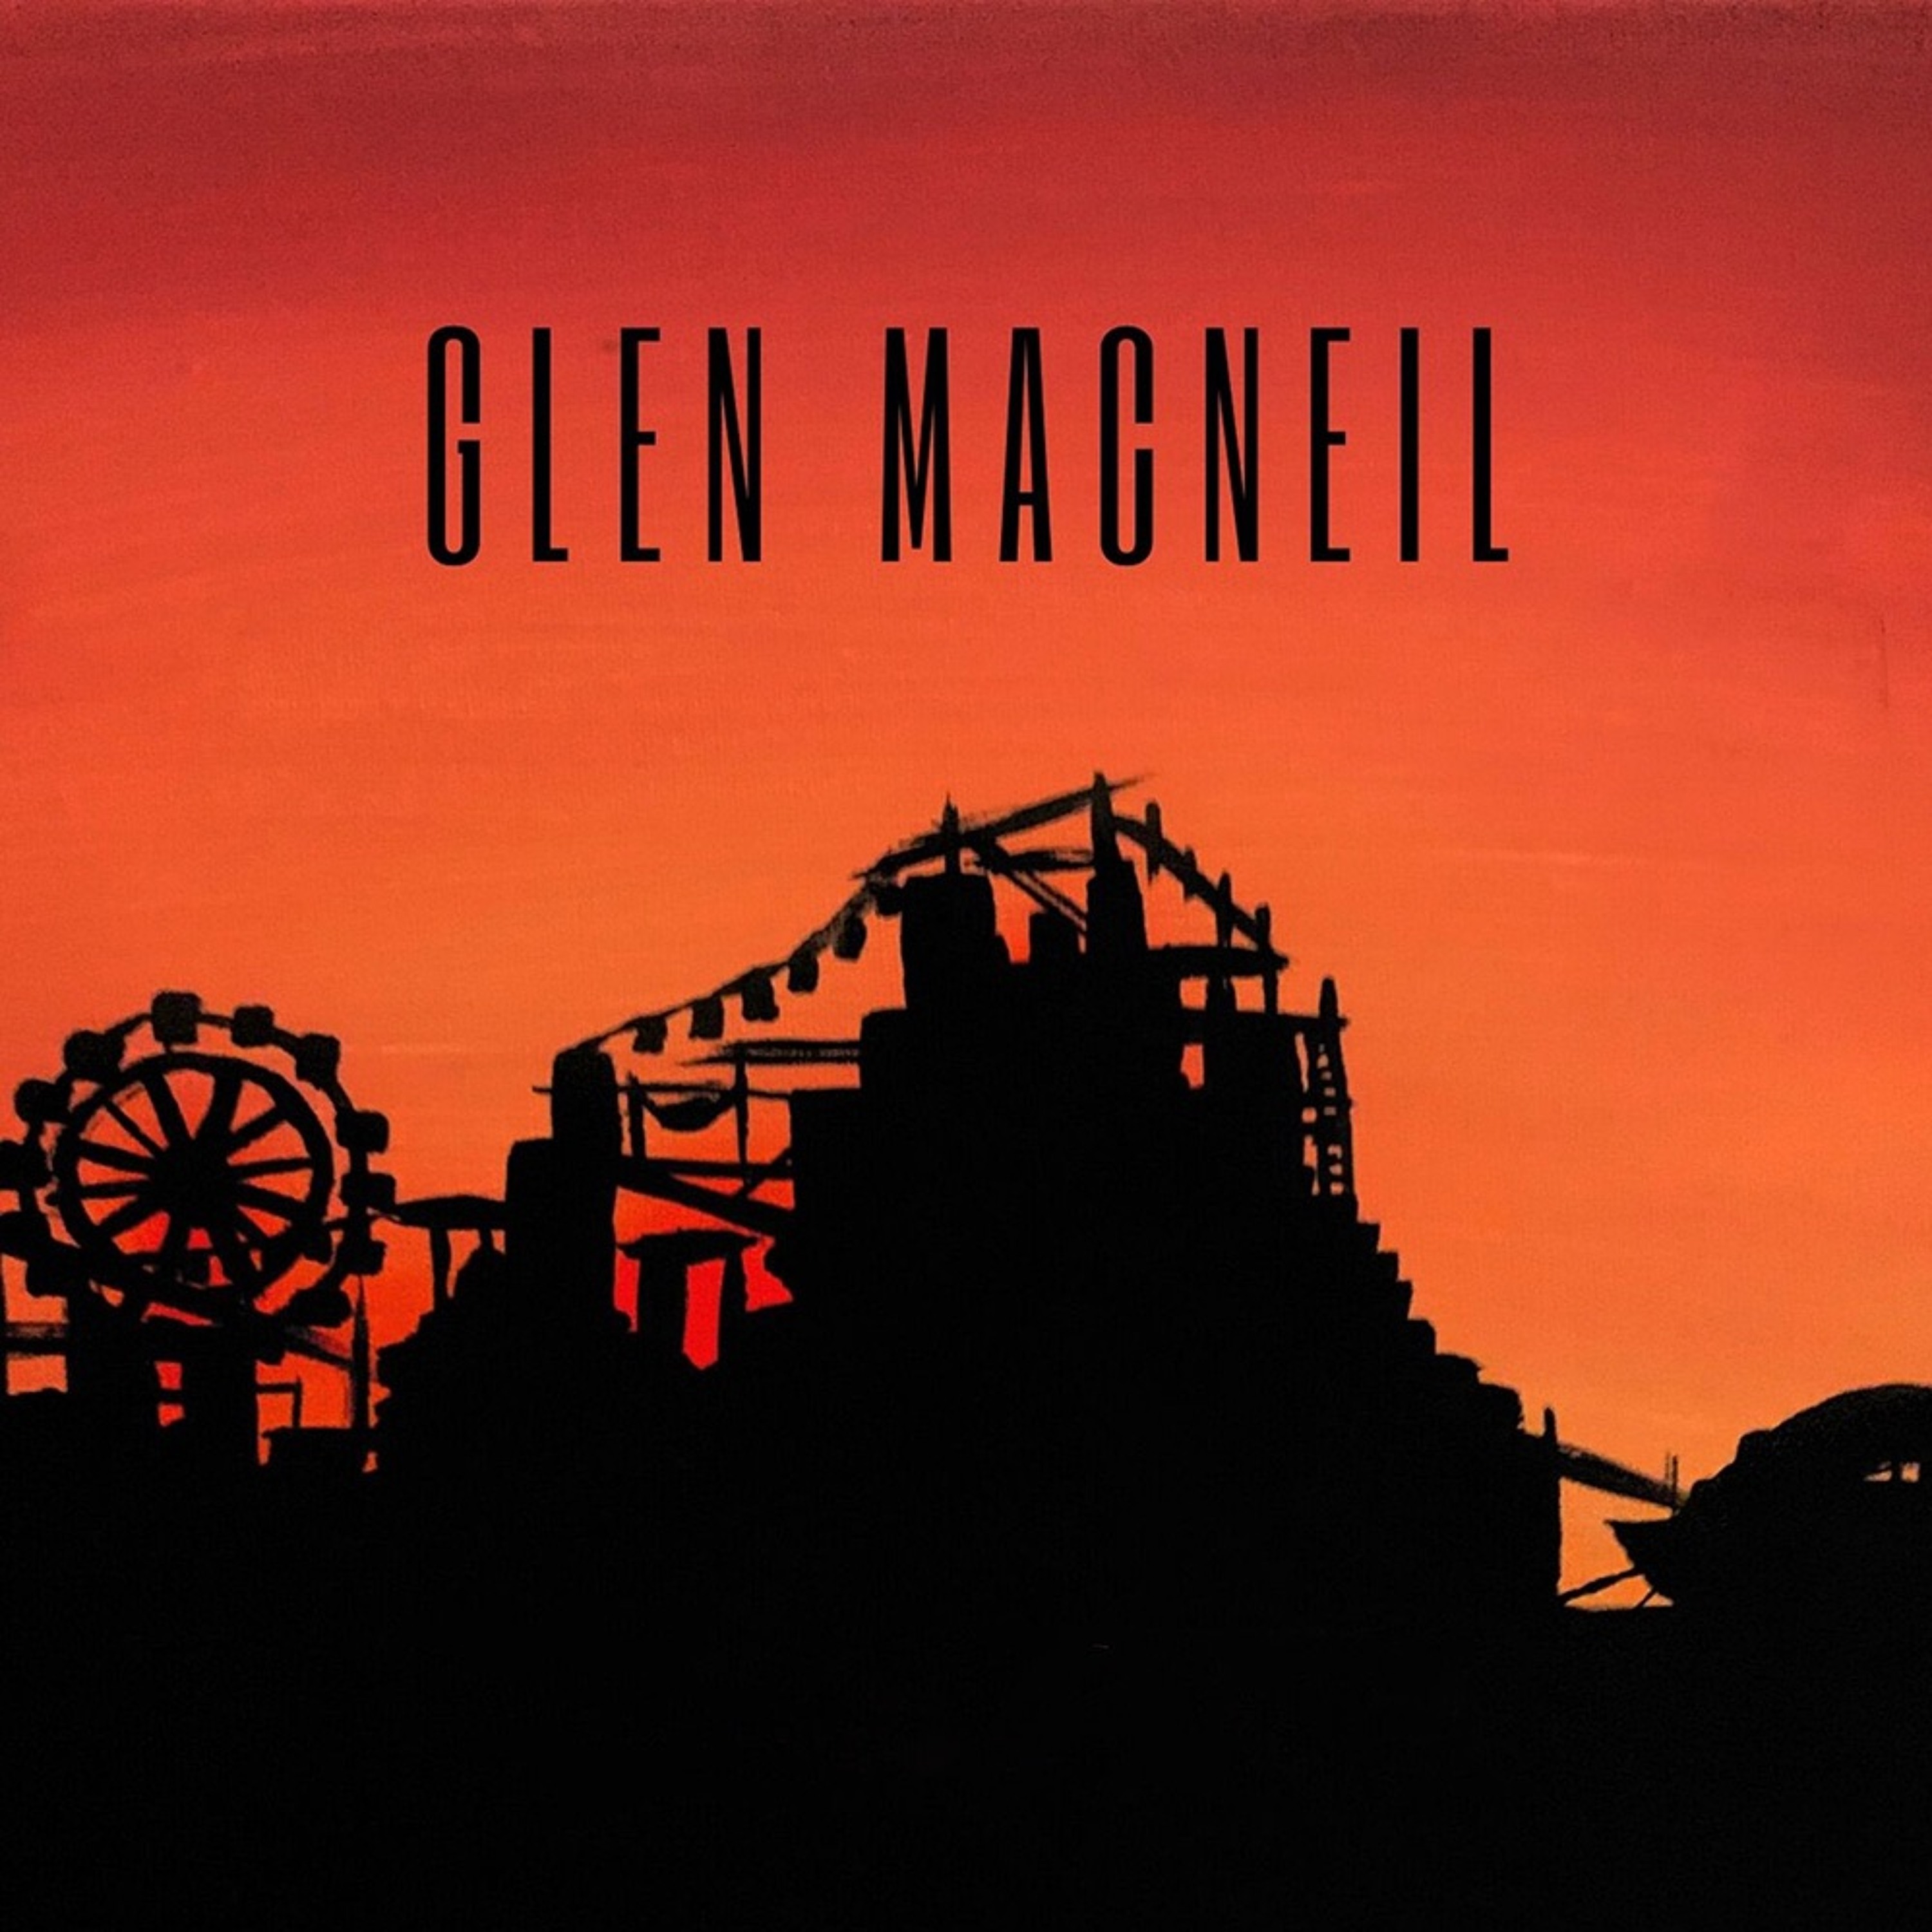 Interview - Glen MacNeil chats about his new self-titled EP